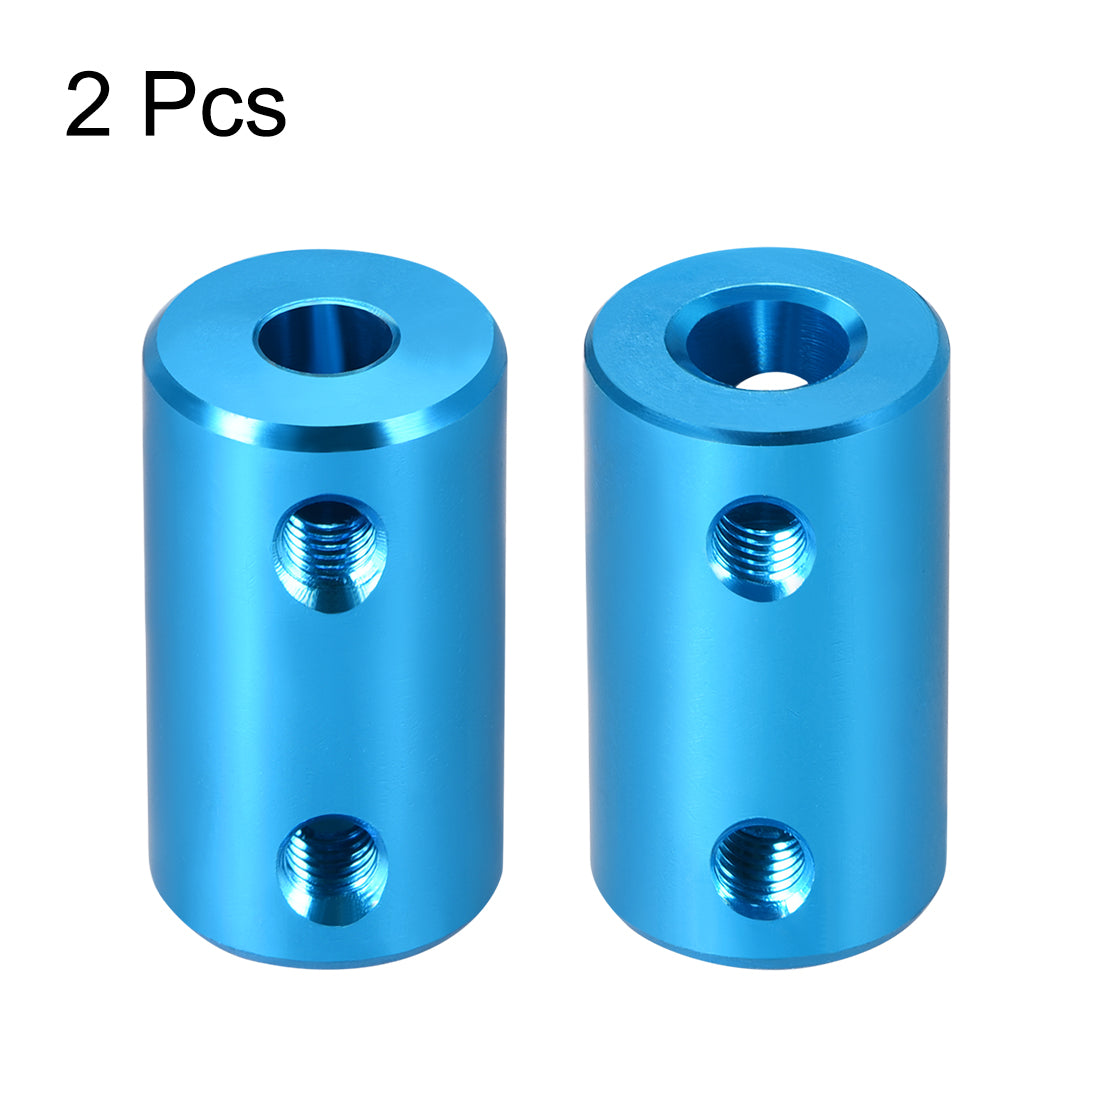 uxcell Uxcell Shaft Coupling 5mm to 6mm Bore L25xD14 Robot Motor Wheel Rigid Coupler Connector Blue 2pcs